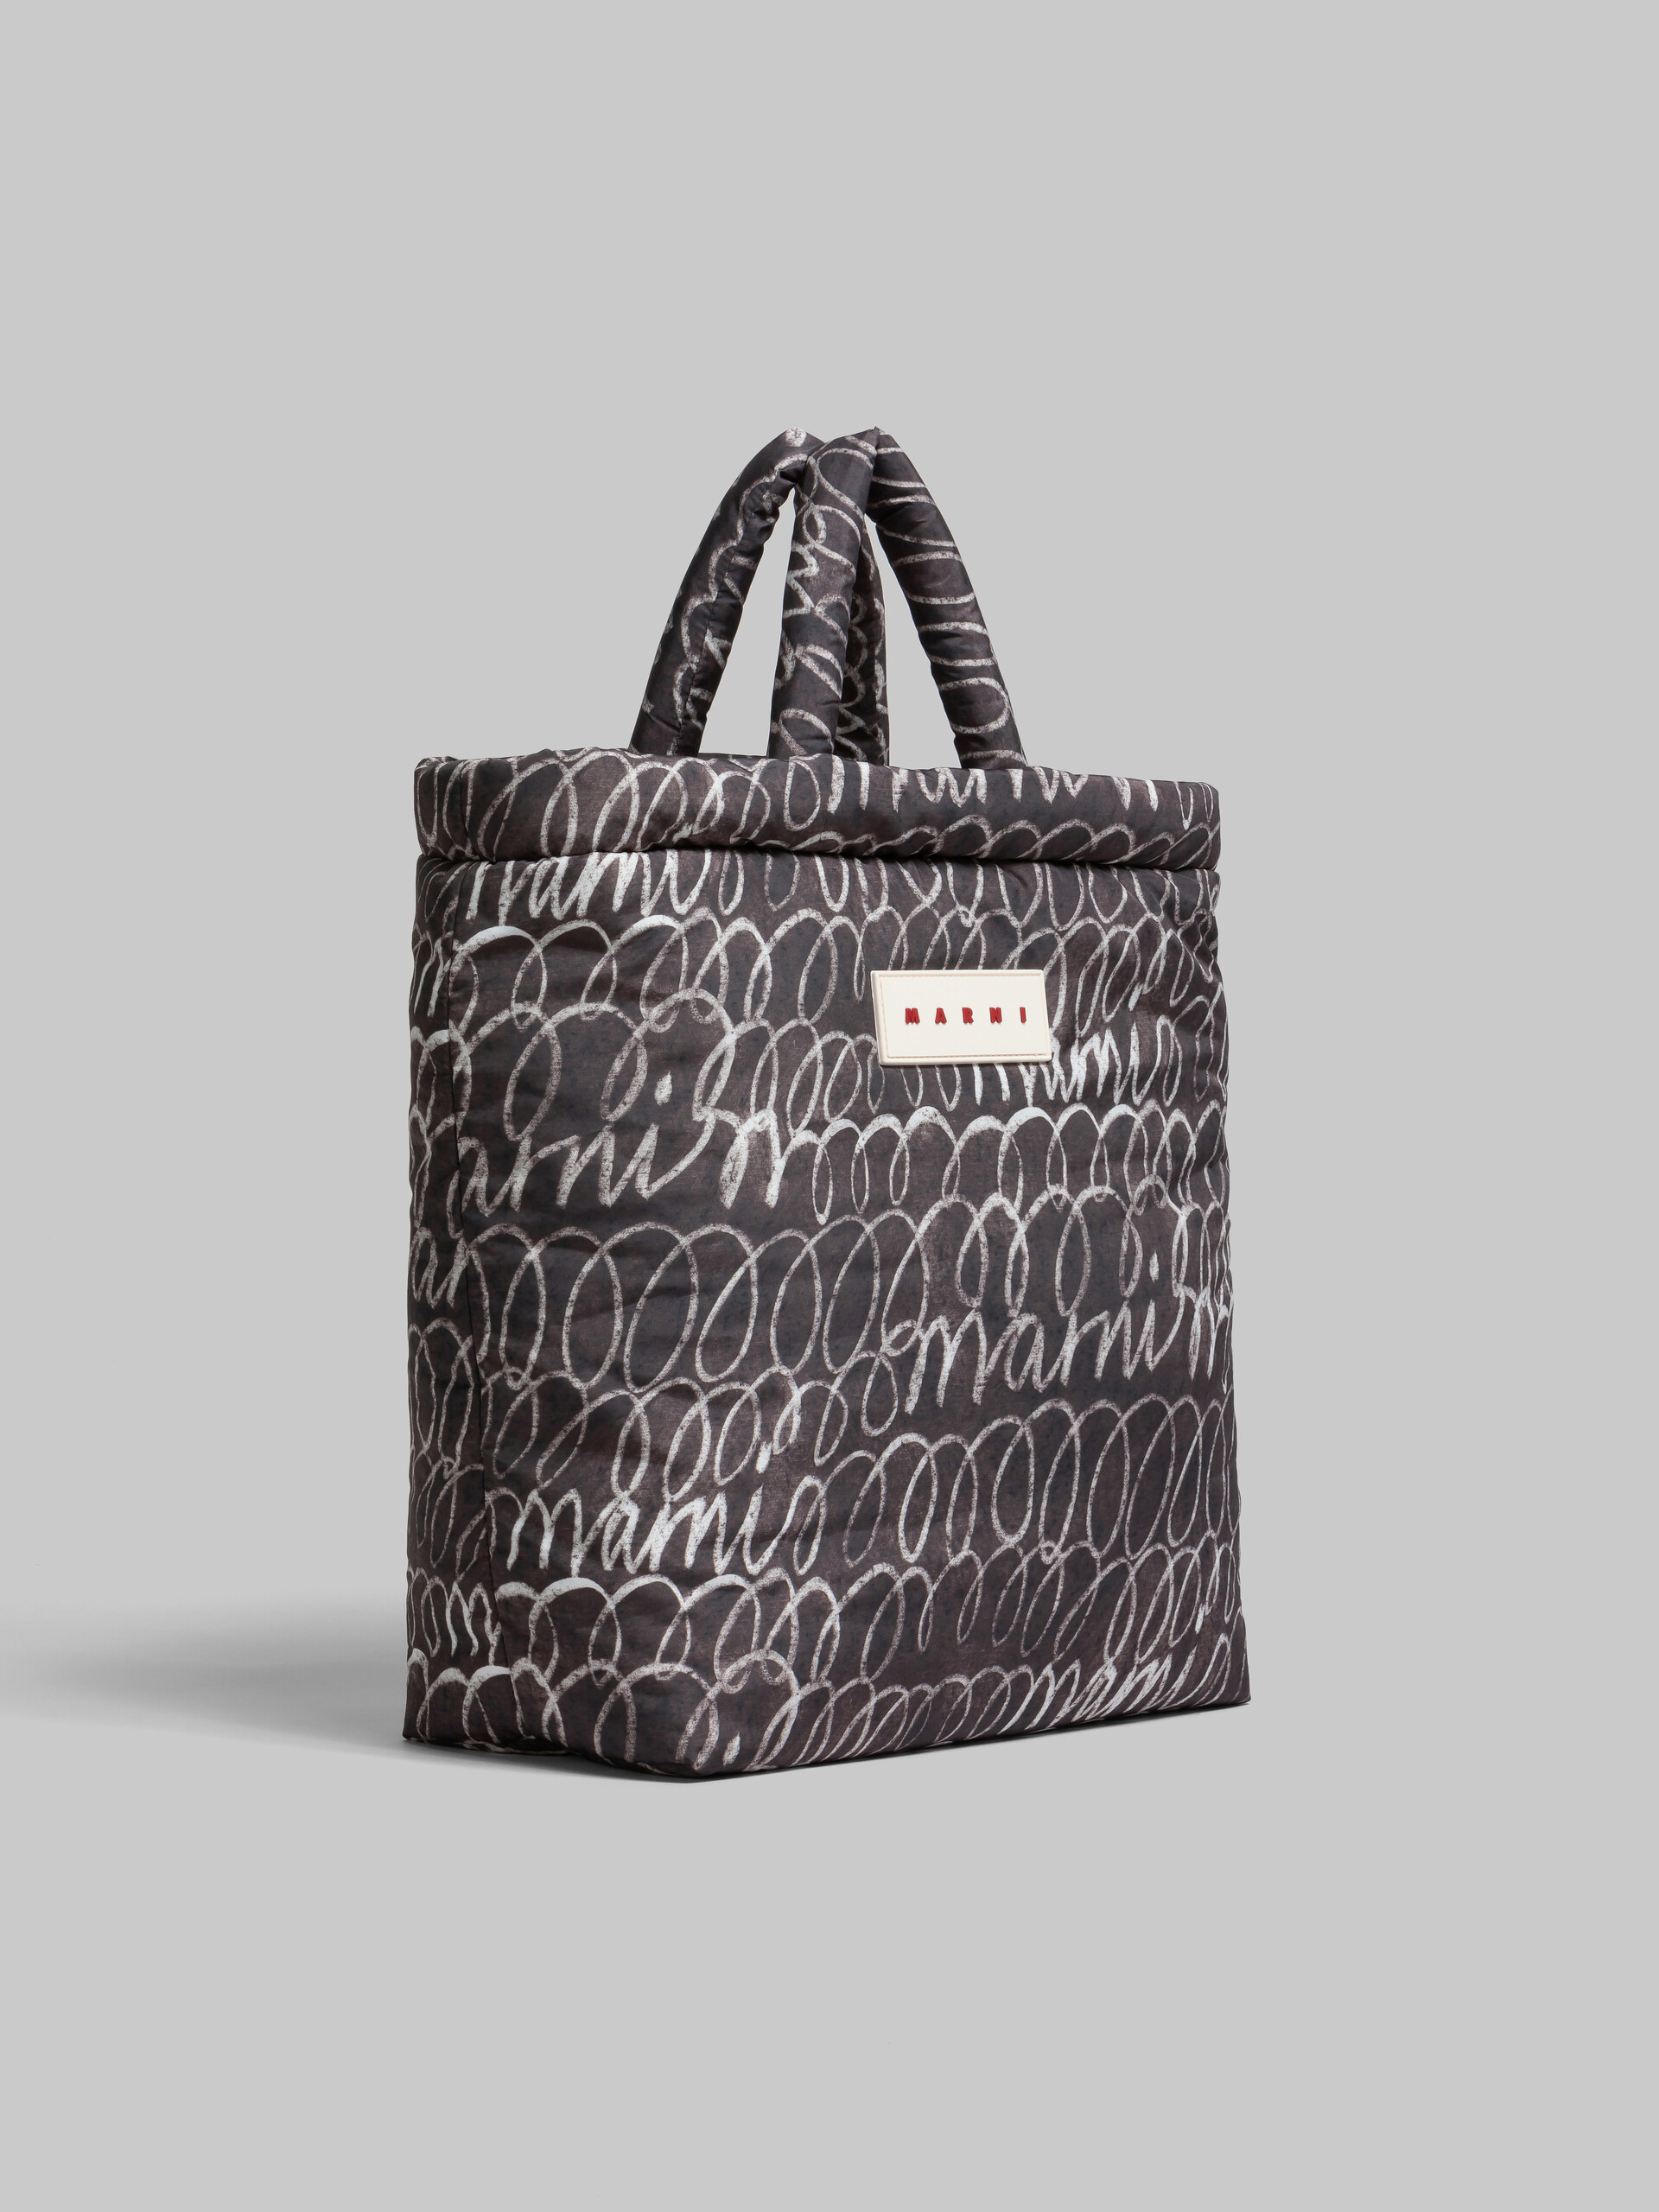 Black Puff tote bag with Marni Scribble print - Shopping Bags - Image 5